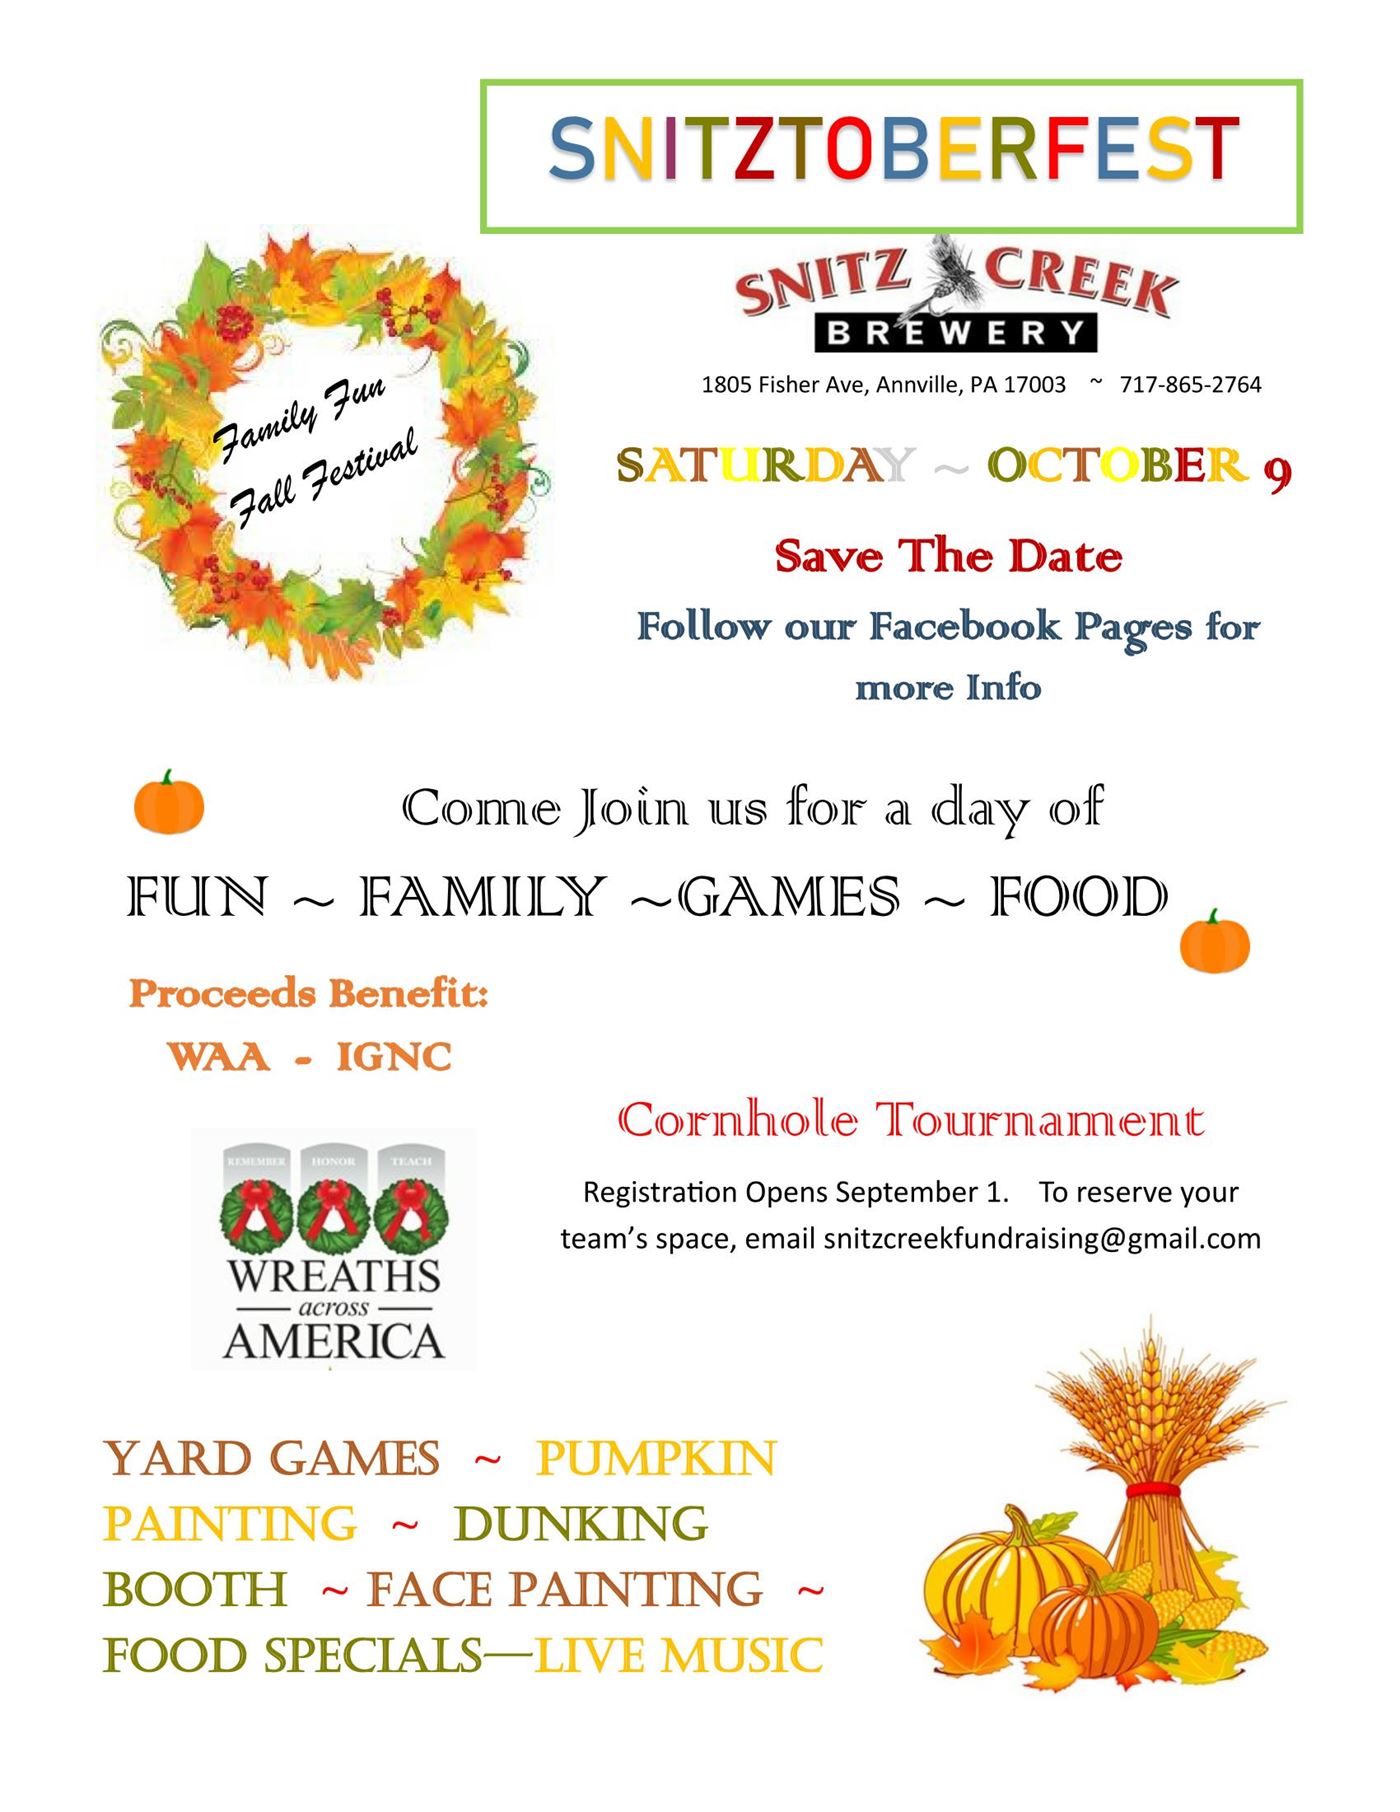 Join us at Snitz Creek Brewery  - something for all ages.
Games, face painting, dunking booth, pumpkin painting, cornhole tournament, great food specials, and other outdoor games.